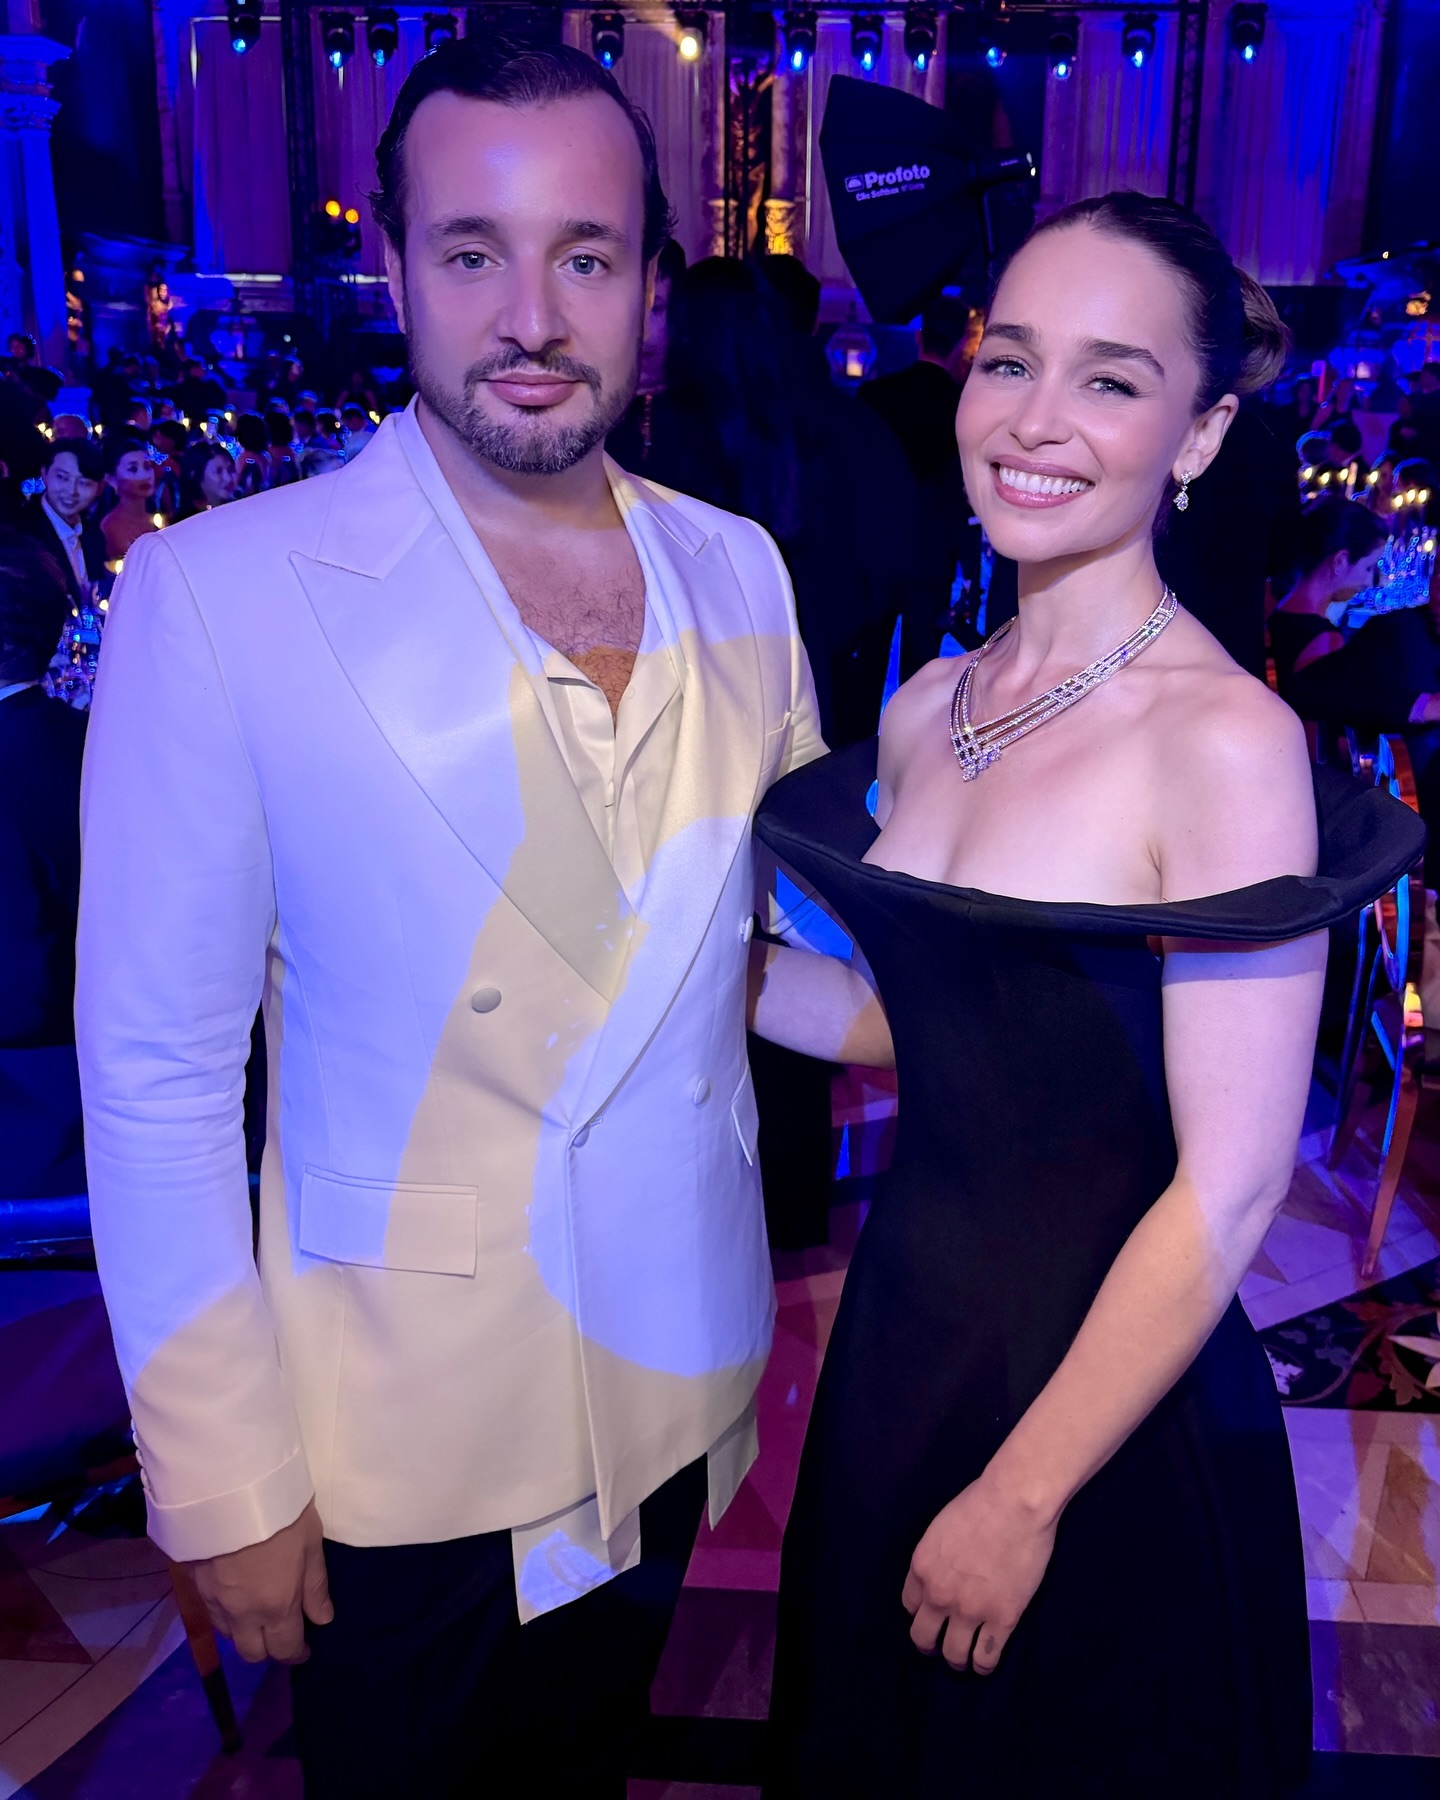 aumetofficial-emiliaclarke-and-voguearabia-may-be-an-image-of-2-people-suit-gown-dinner-jacket-and-blazer-1718237023312983967443-1718246288944-17182462890761047041699.jpg